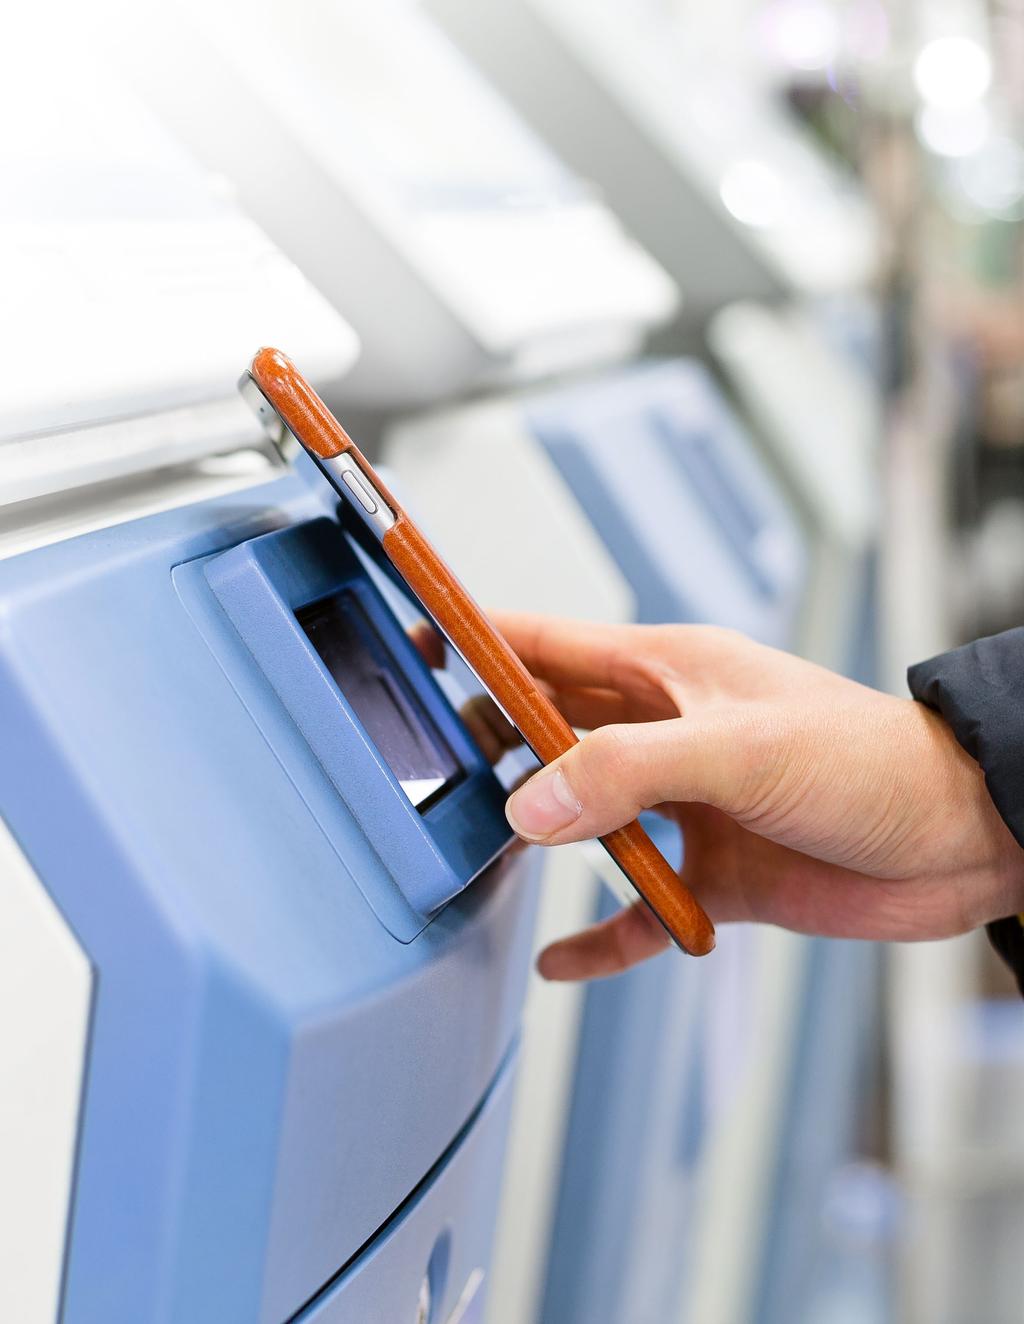 Trends for Personalized Customer Service in Kiosks and Digital Signage www.honeywellaidc.